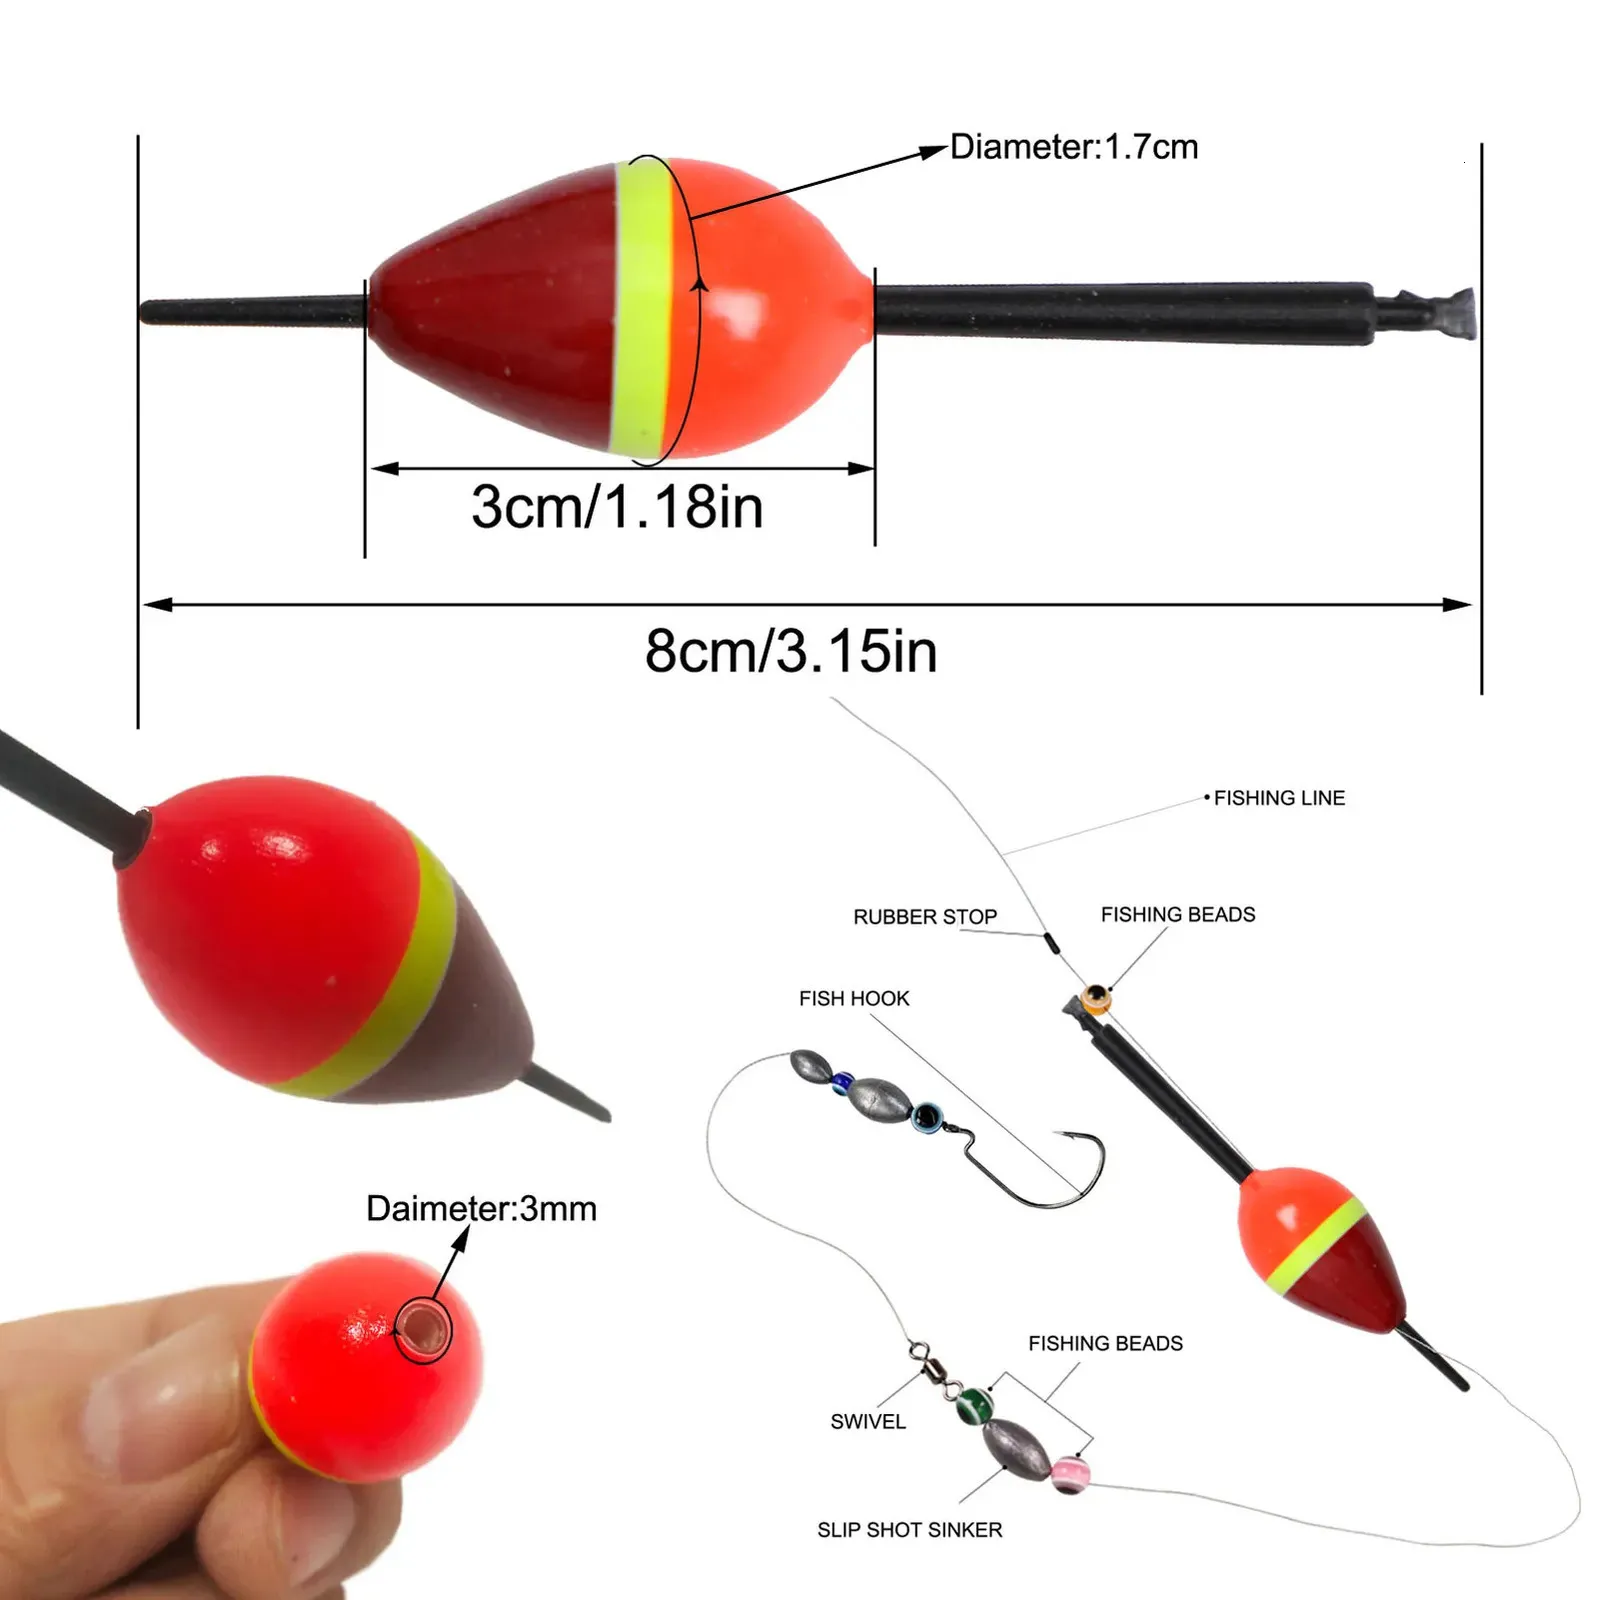 Fishing Bobbers Collection Cork Floats Buoy Set Lighted Paulownia Wood  Plastic Stick Kit Buoyancy 2g 758cm 240108 From Chao07, $20.76